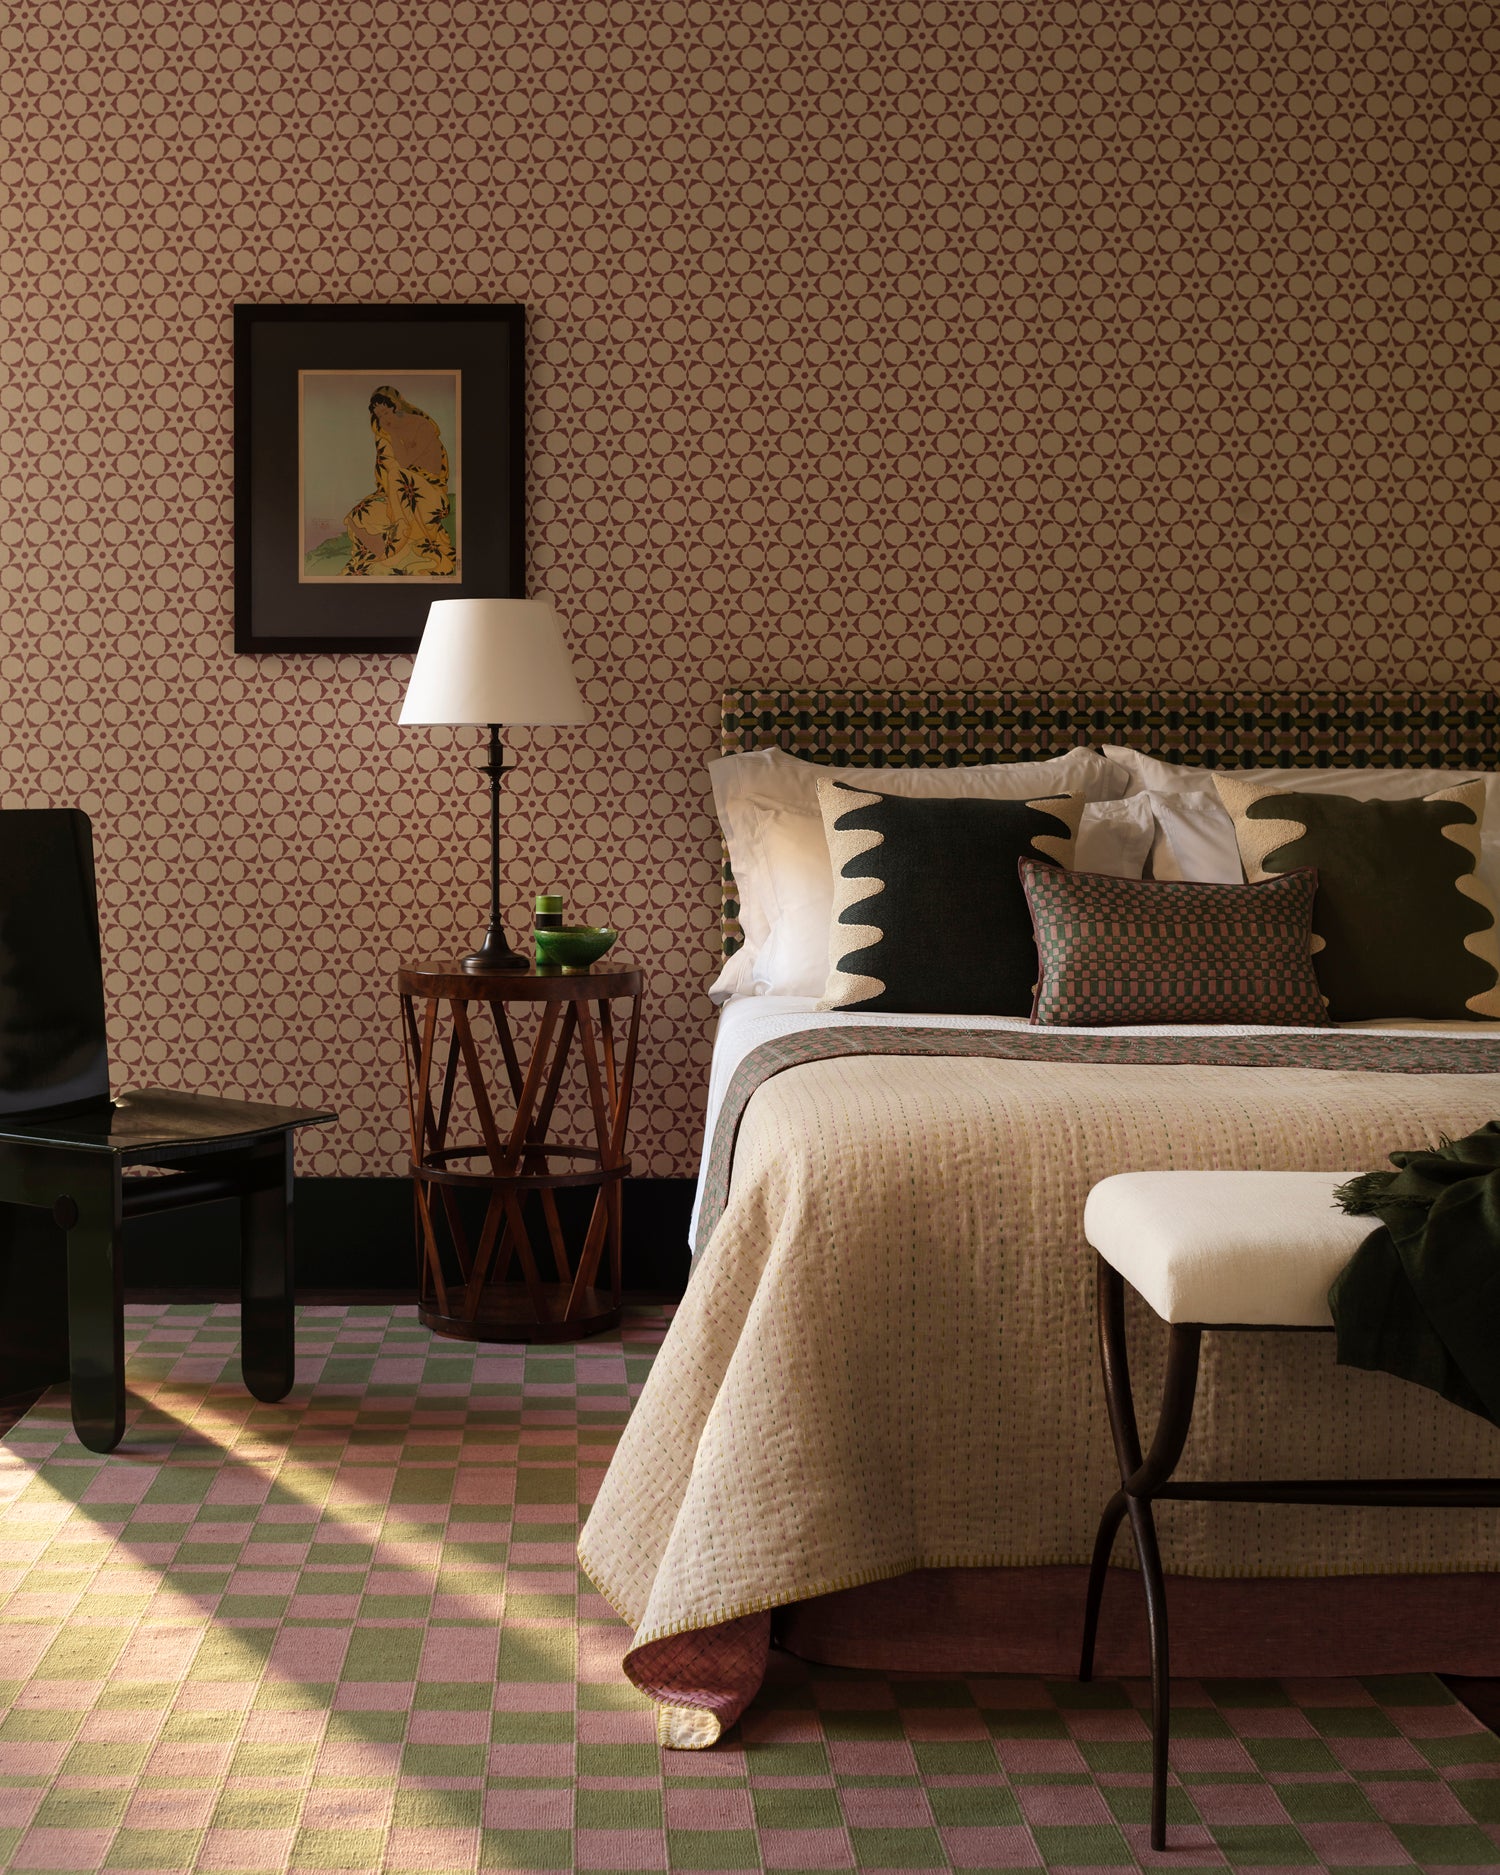 A bedroom fulled a star patterned wallpaper, checkerboard rug in a palatte of cream, black, green and lavender.